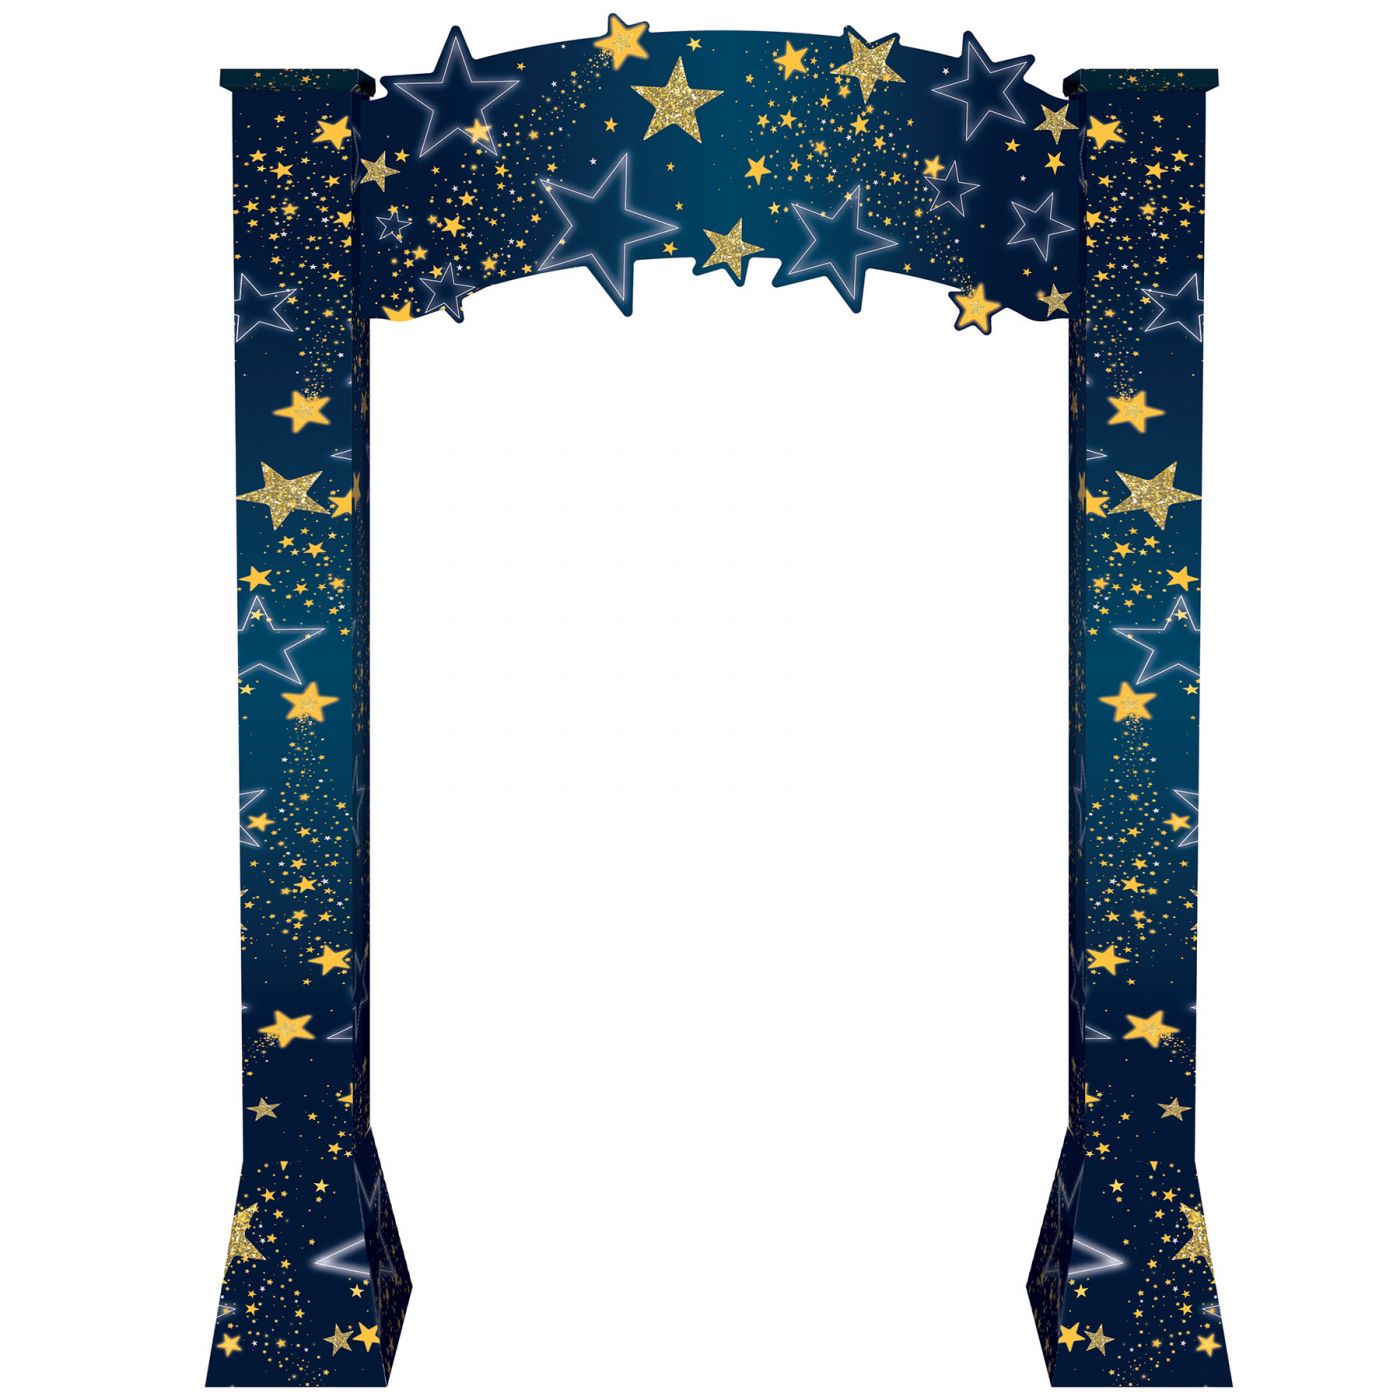 Starry Night 3-D Archway Prop (1) image